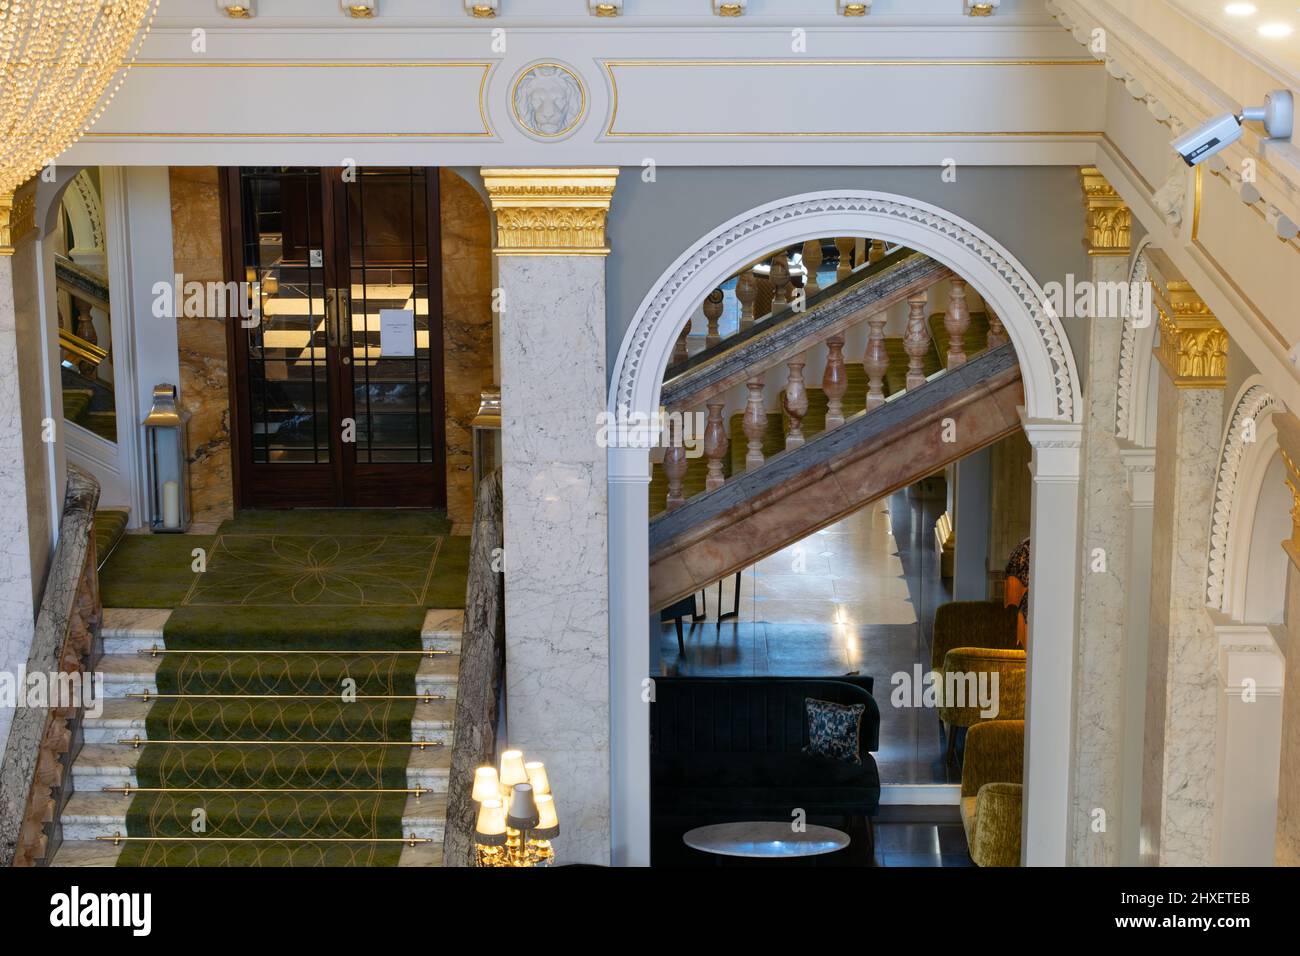 The Clermont Victoria hotel. Buckingham Palace Road, London, UK. Staircase in lobby. Stock Photo